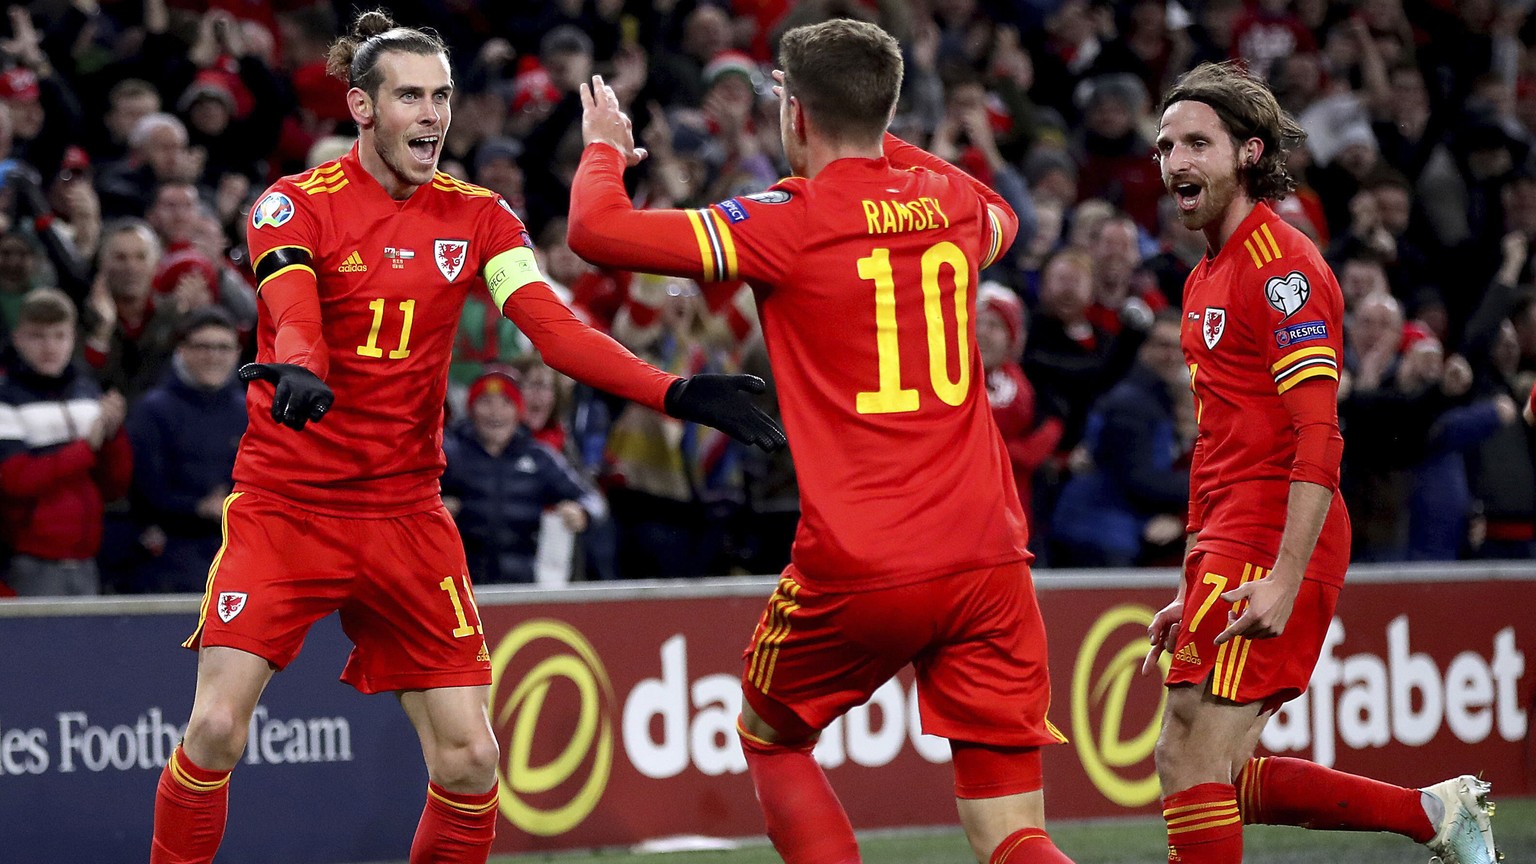 Wales&#039; Aaron Ramsey celebrates scoring his side&#039;s first goal of the game against Hungary, with team-mates Gareth Bale, left, and Joe Allen, right, during their UEFA Euro 2020 Qualifying socc ...